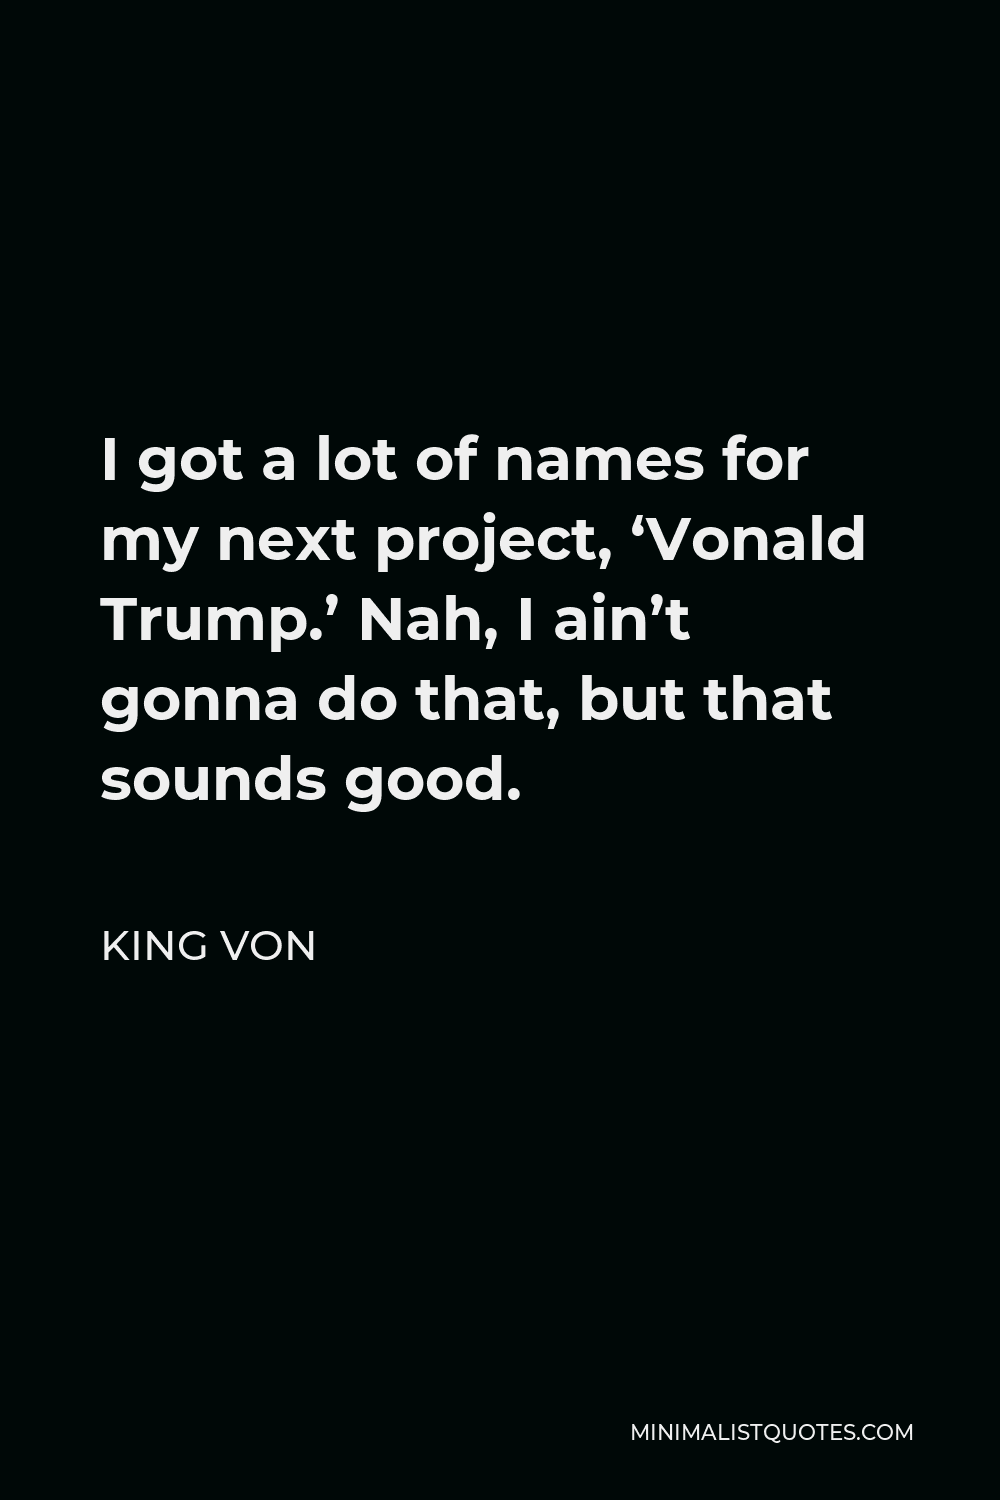 King Von Quote - I got a lot of names for my next project, ‘Vonald Trump.’ Nah, I ain’t gonna do that, but that sounds good.